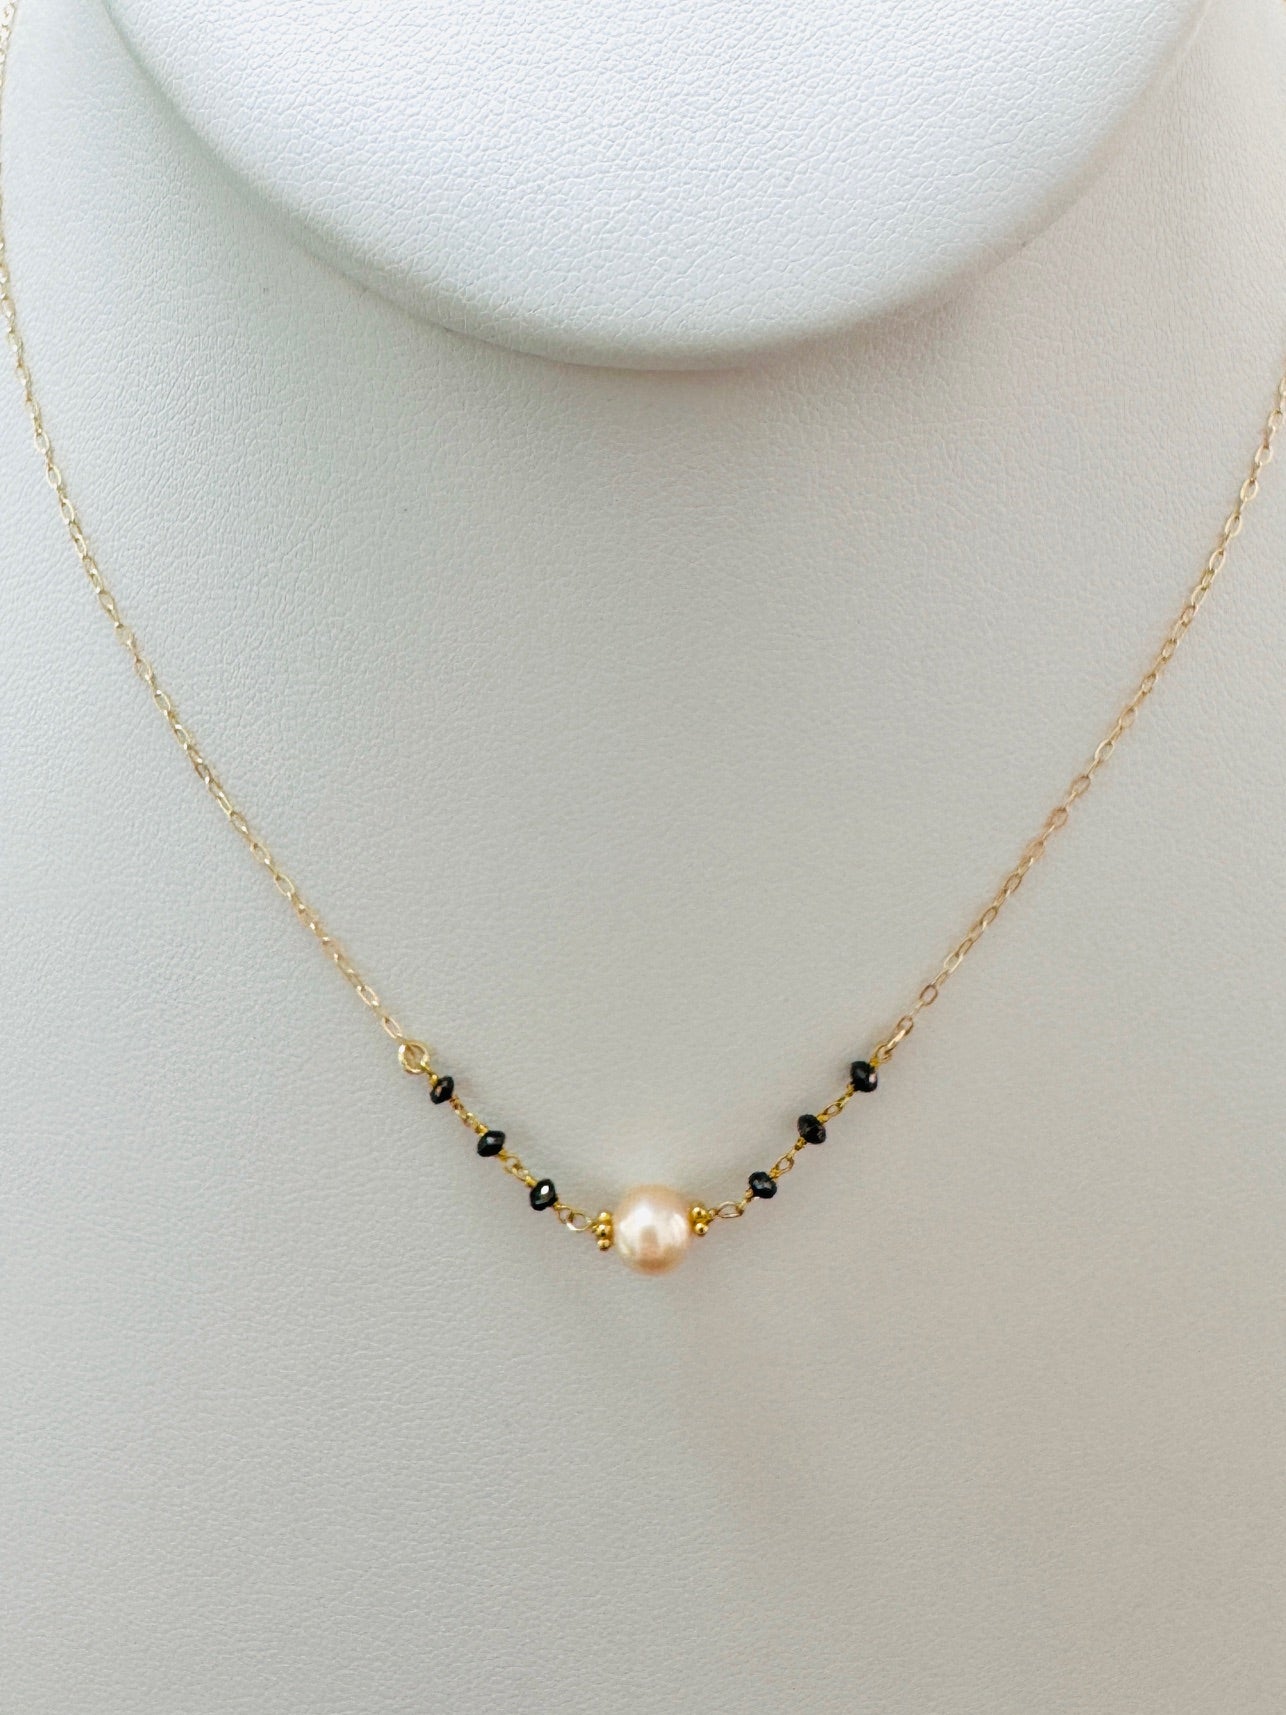 15"-17" Pink Freshwater Pearl and Black Diamond Bead Necklace in 14K Yellow Gold - NCK-802-7ROSPRLDIA14Y-PKBK-17-09021